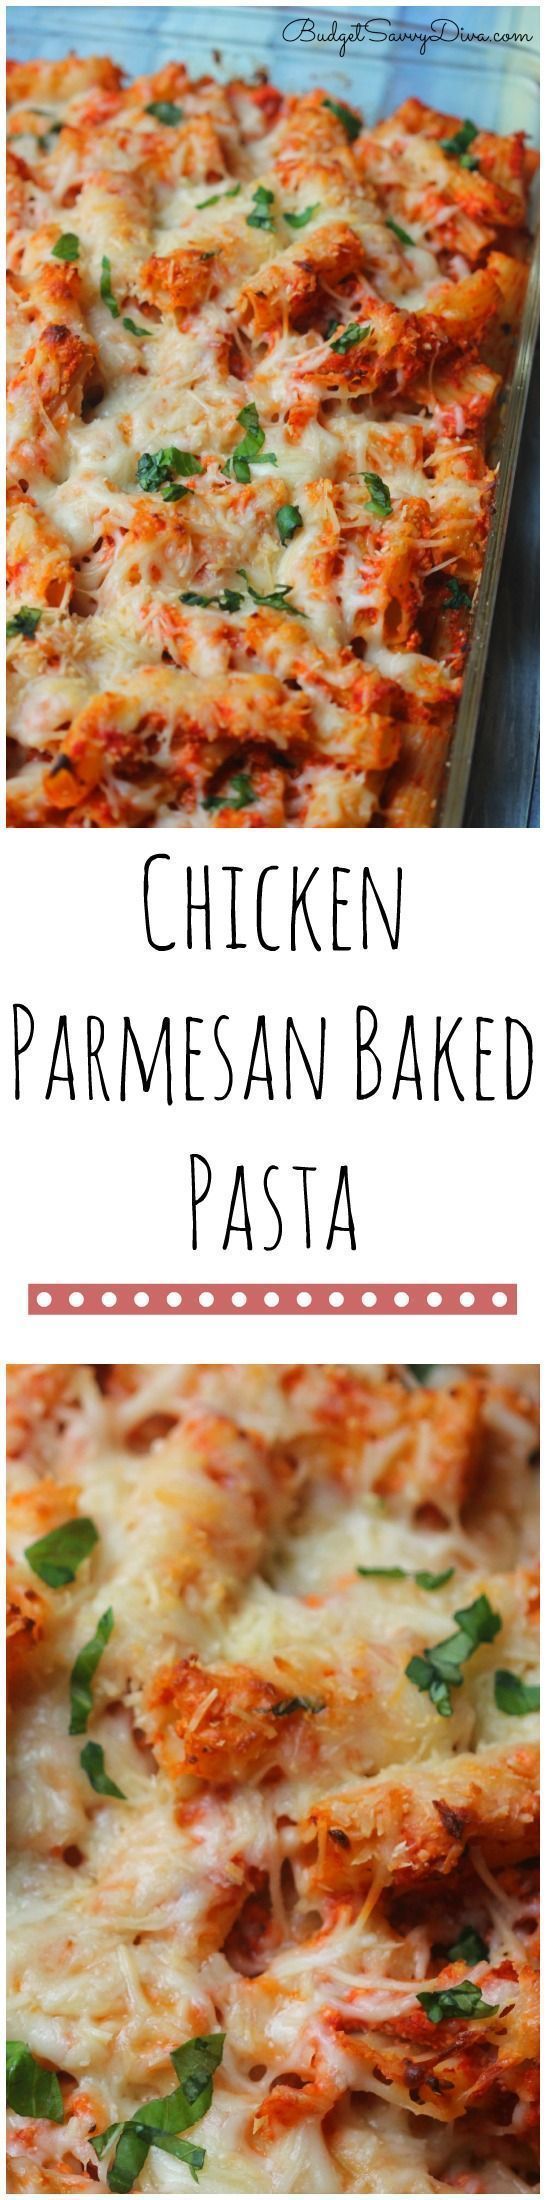 You need this recipe in your life! Super simple to make and frugal too! My whole family loved it  Chicken Parmesan Baked Pasta